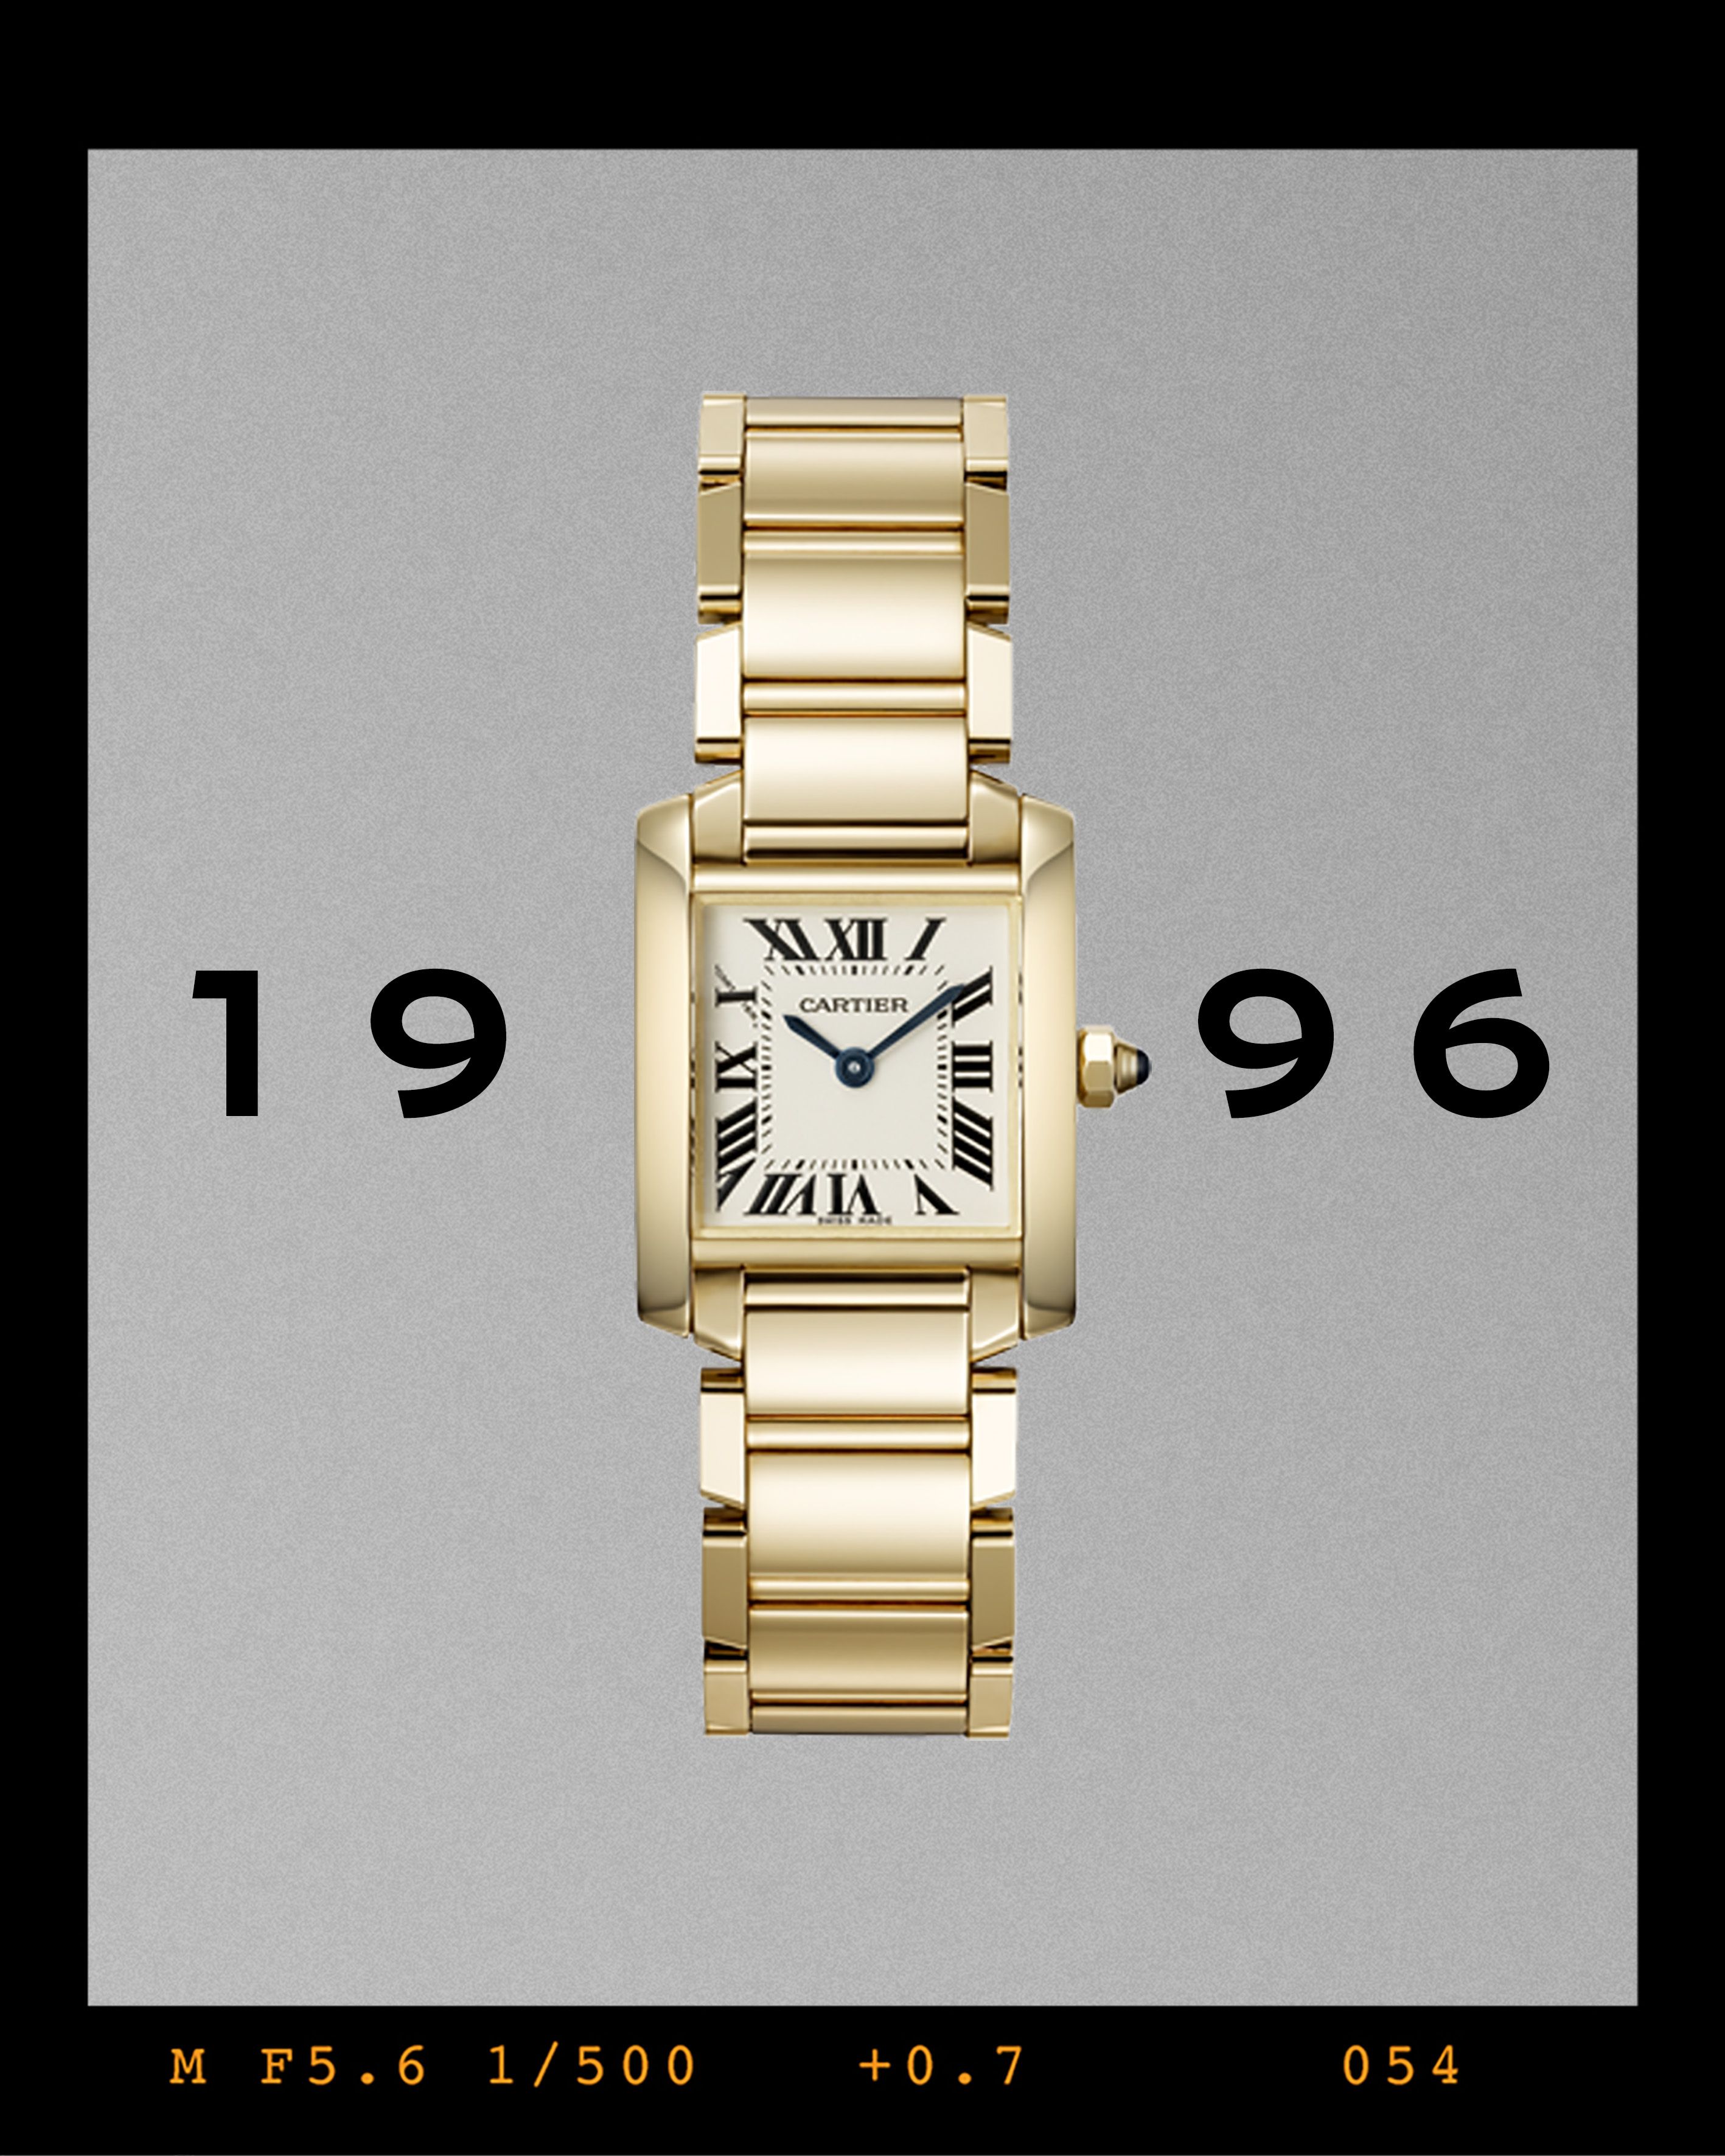 Cartier Tank Francaise Small - Yellow Gold Watches